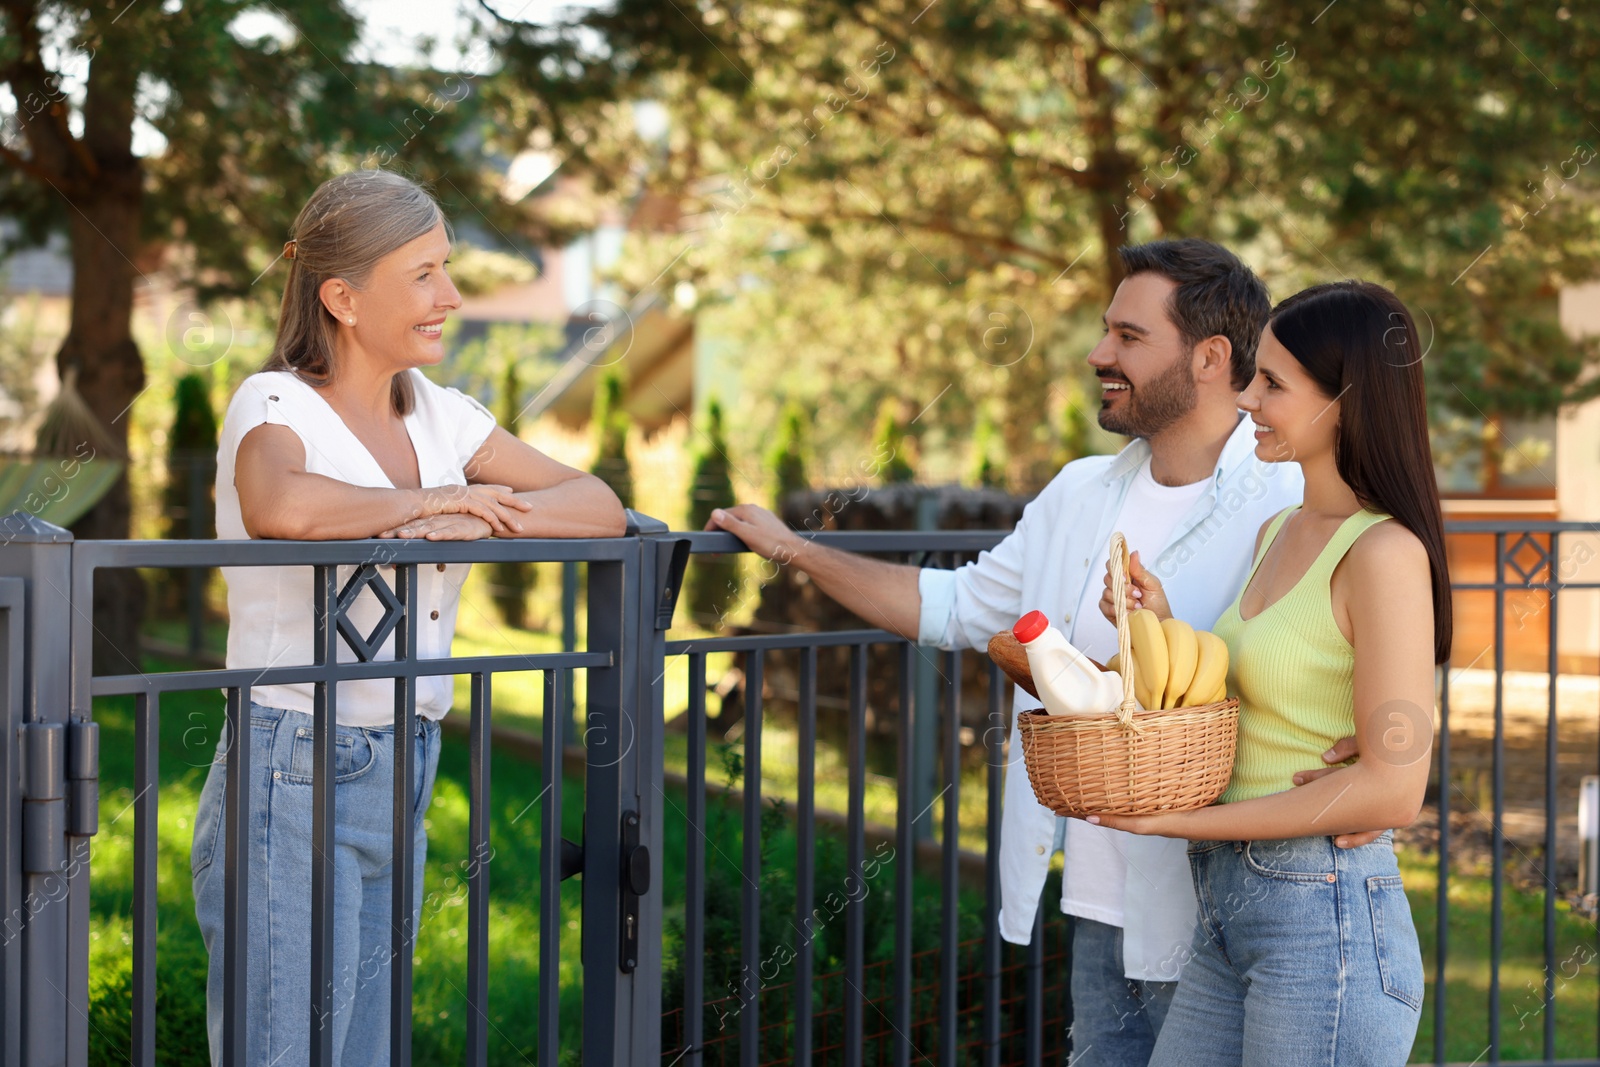 Photo of Friendly relationship with neighbours. Young couple with wicker basket of products treating senior woman near fence outdoors